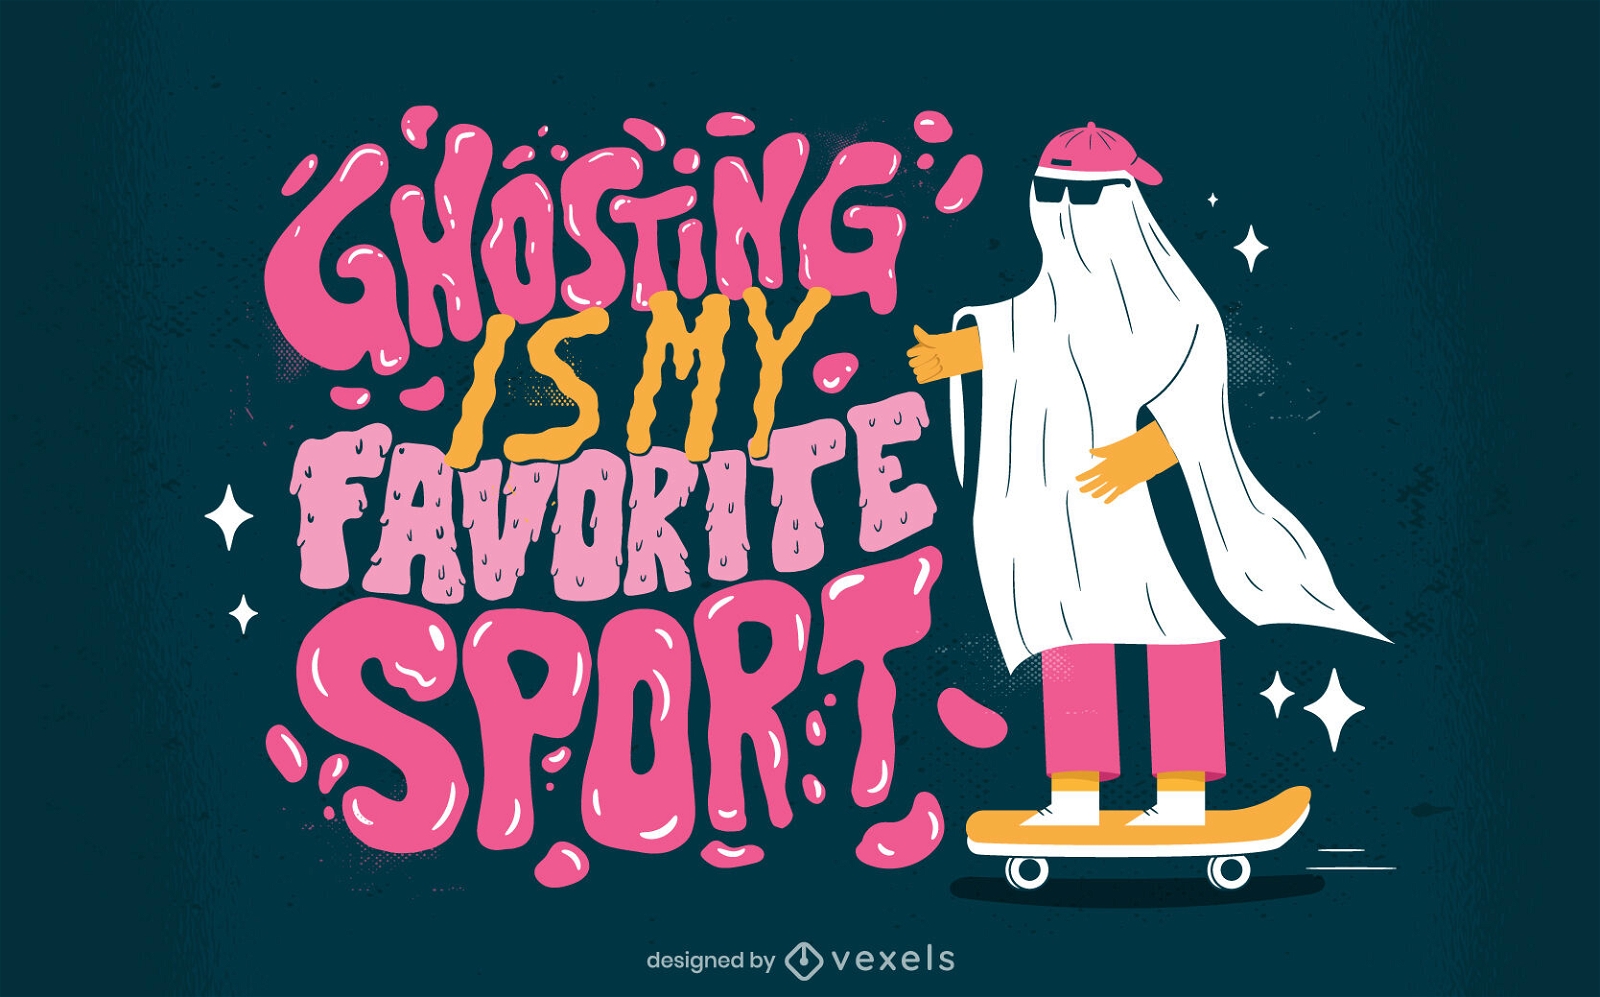 Cool anti-Valentine's ghosting quote t-shirt design